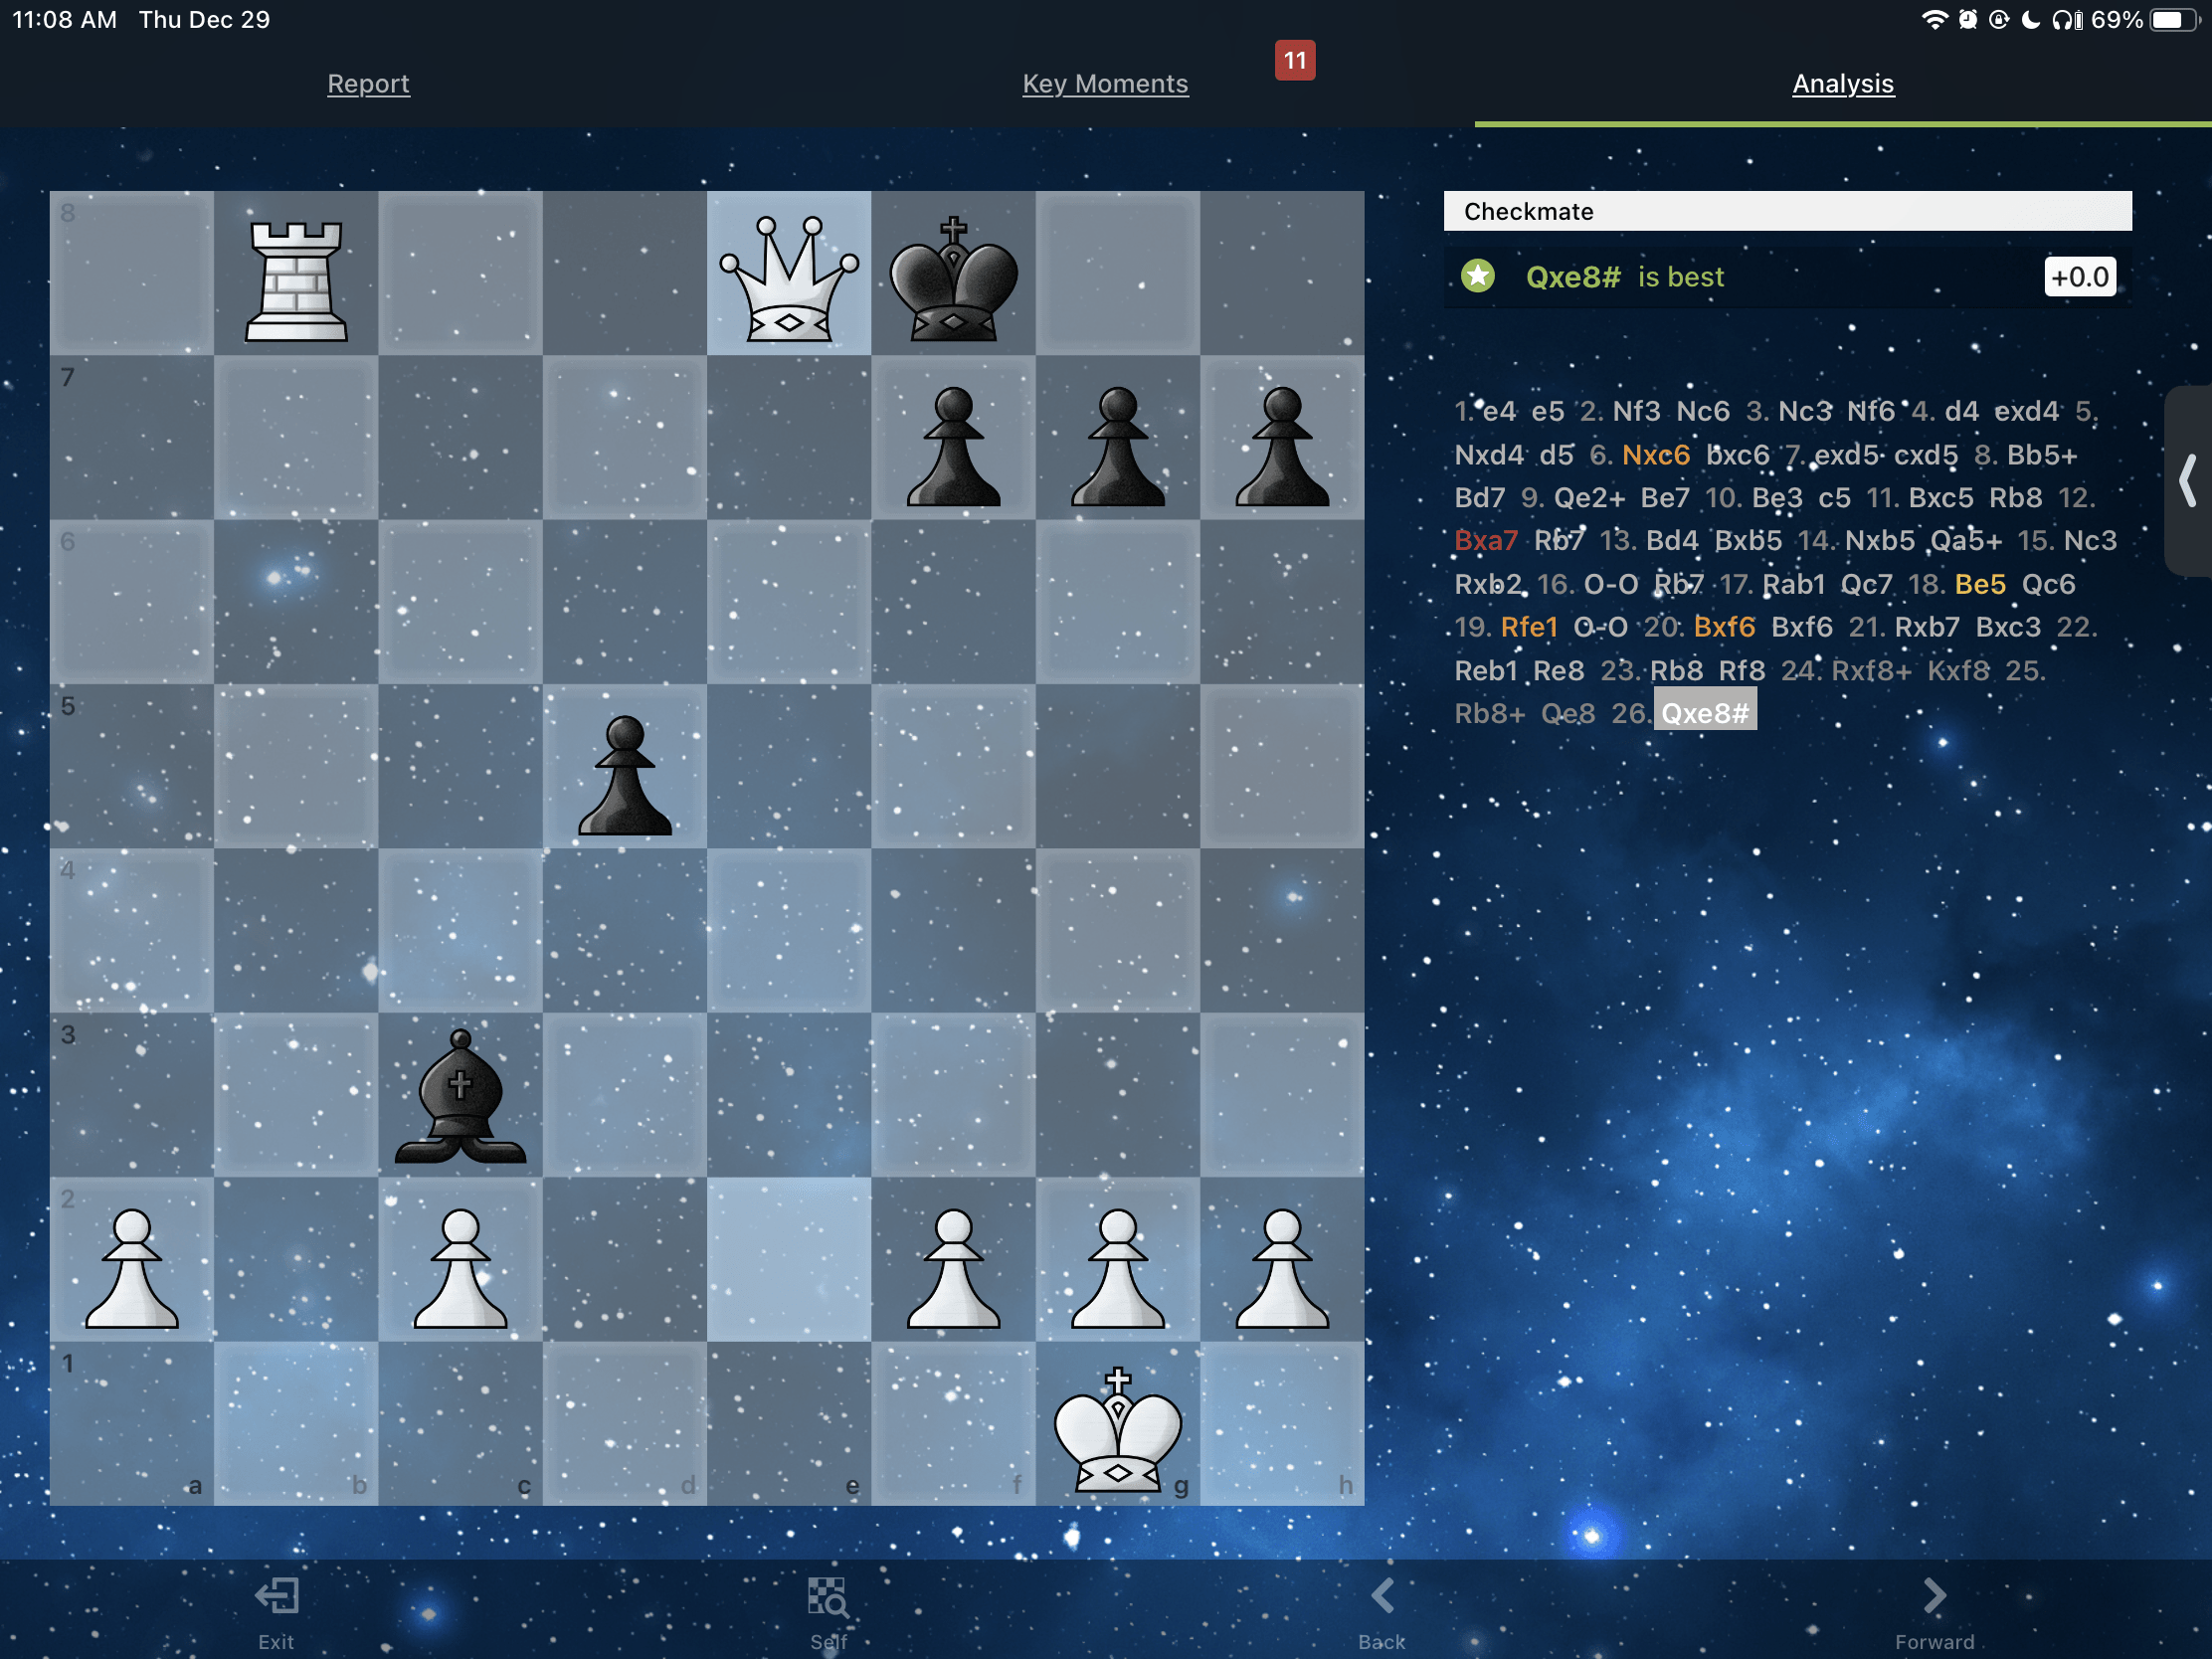 lichess • Free Online Chess – Apps on Google Play